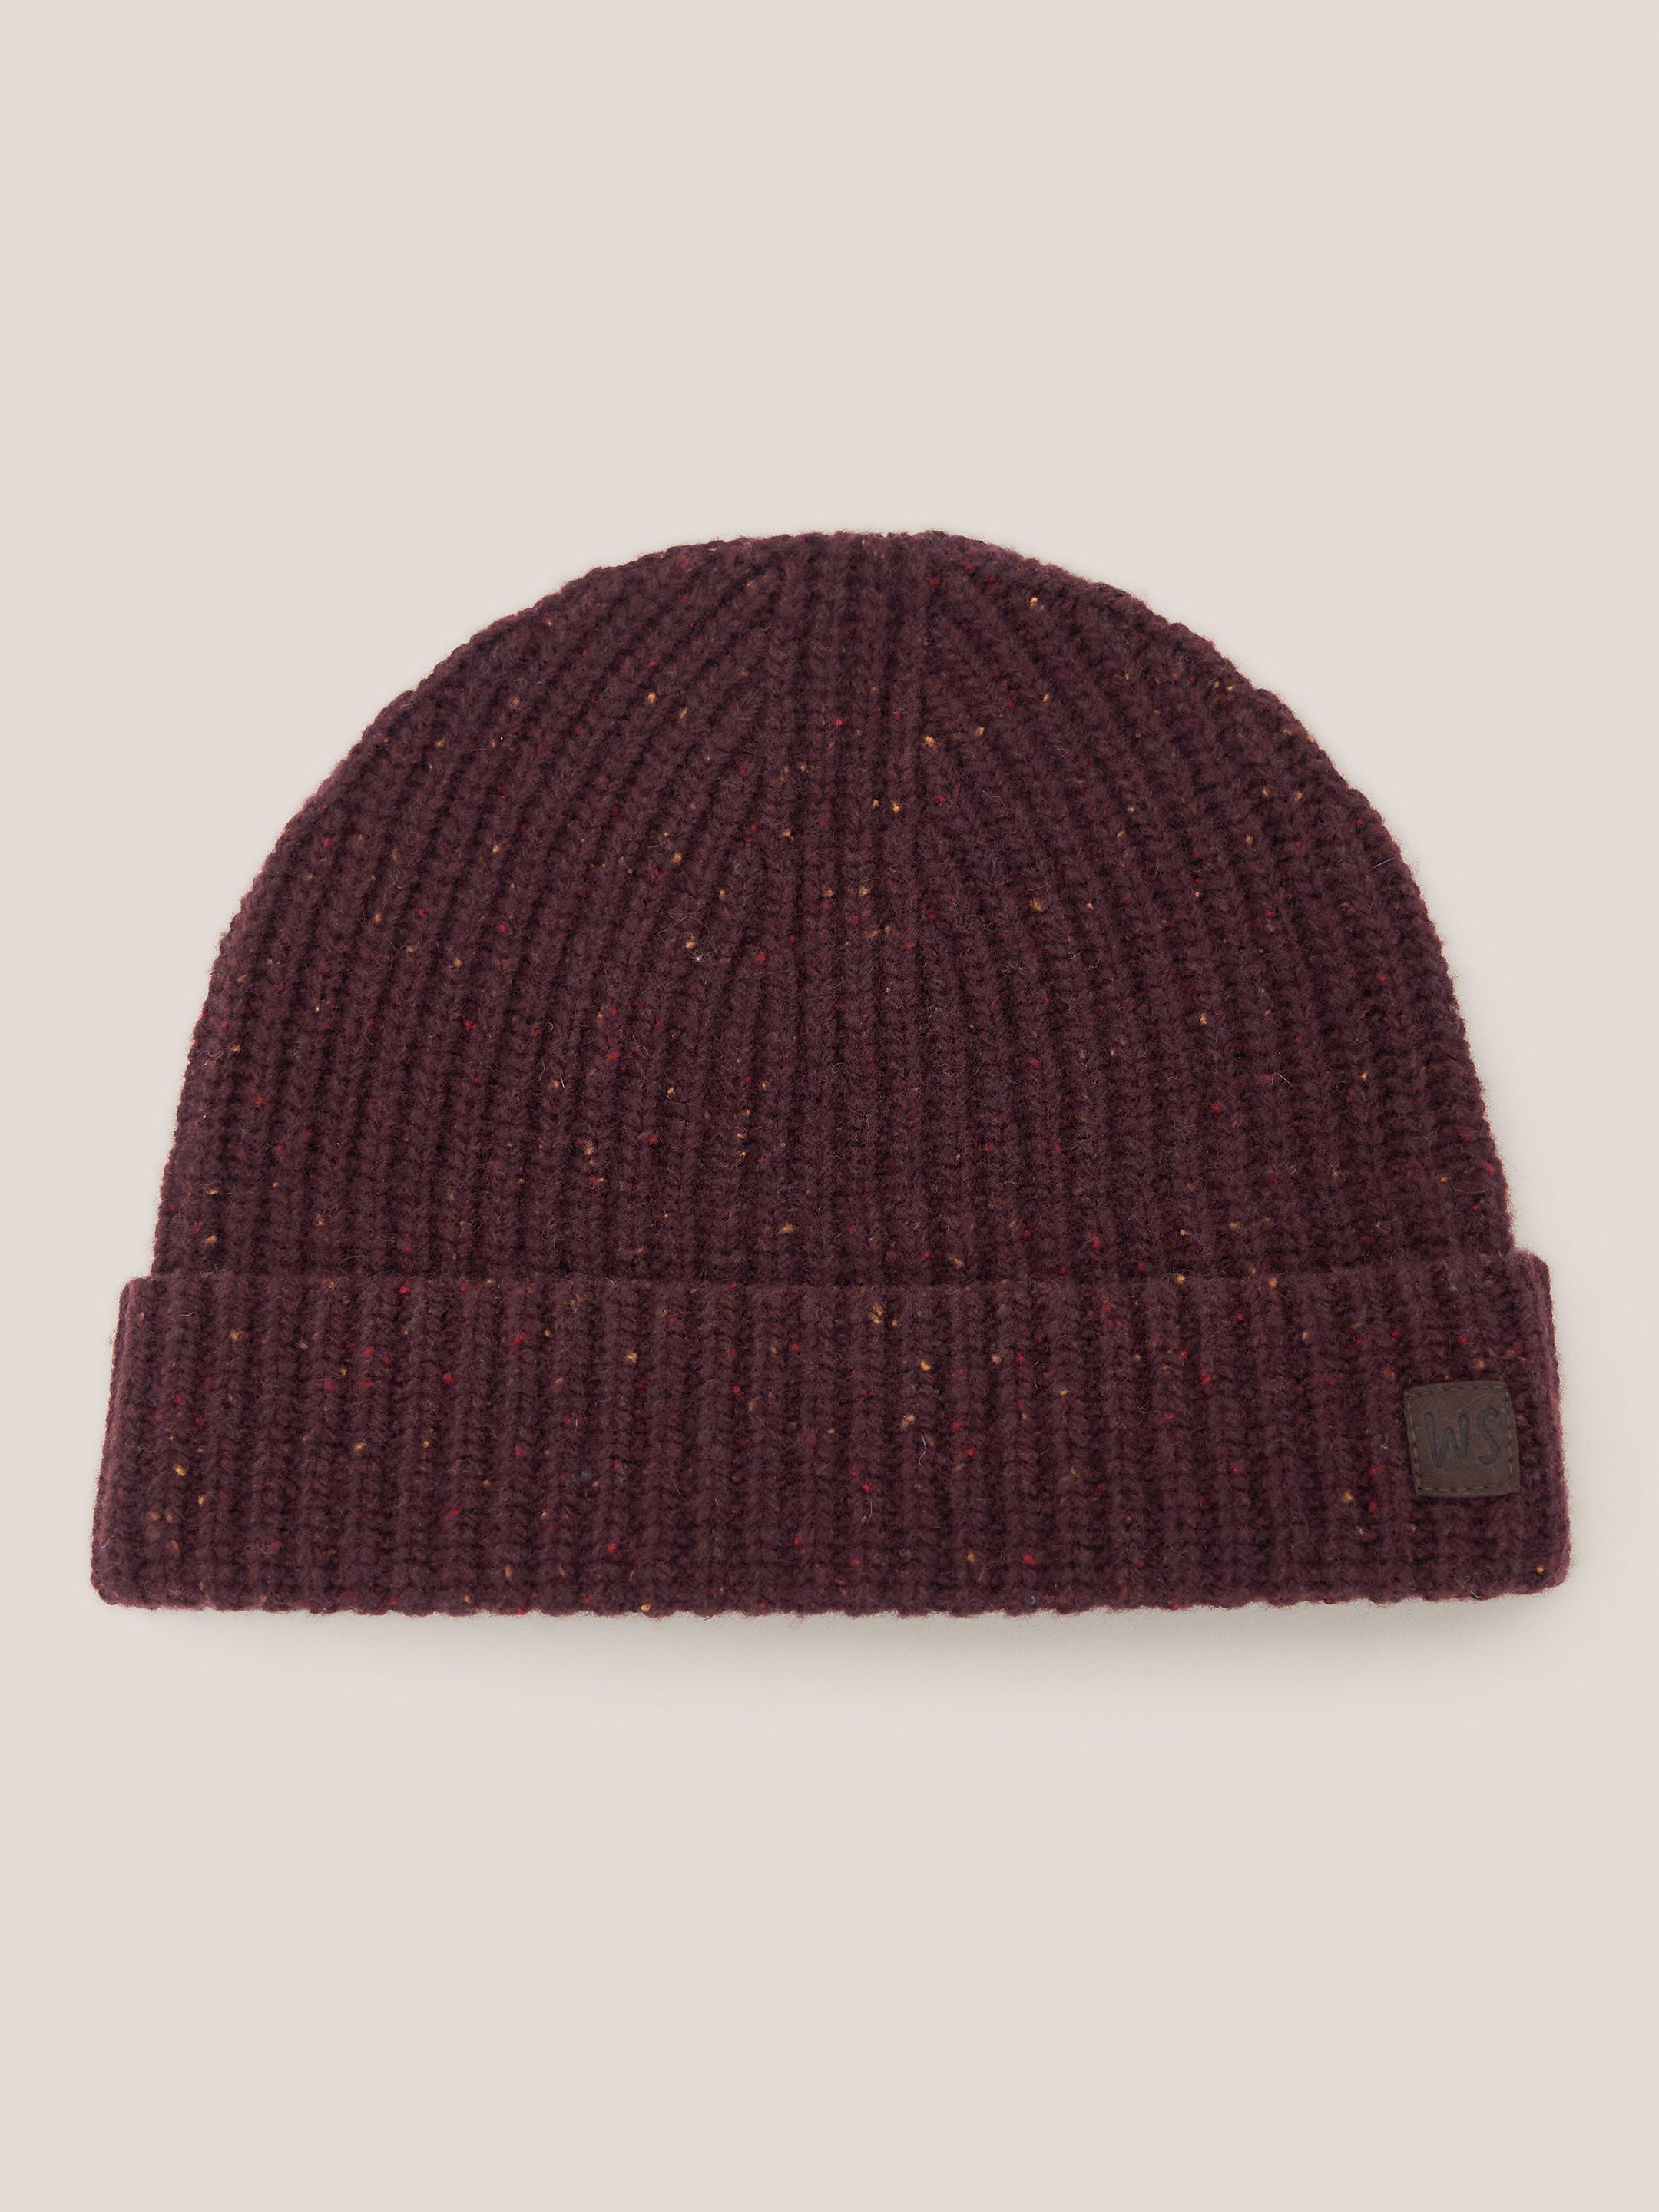 Wool Ribbed Beanie in DK PLUM - FLAT FRONT